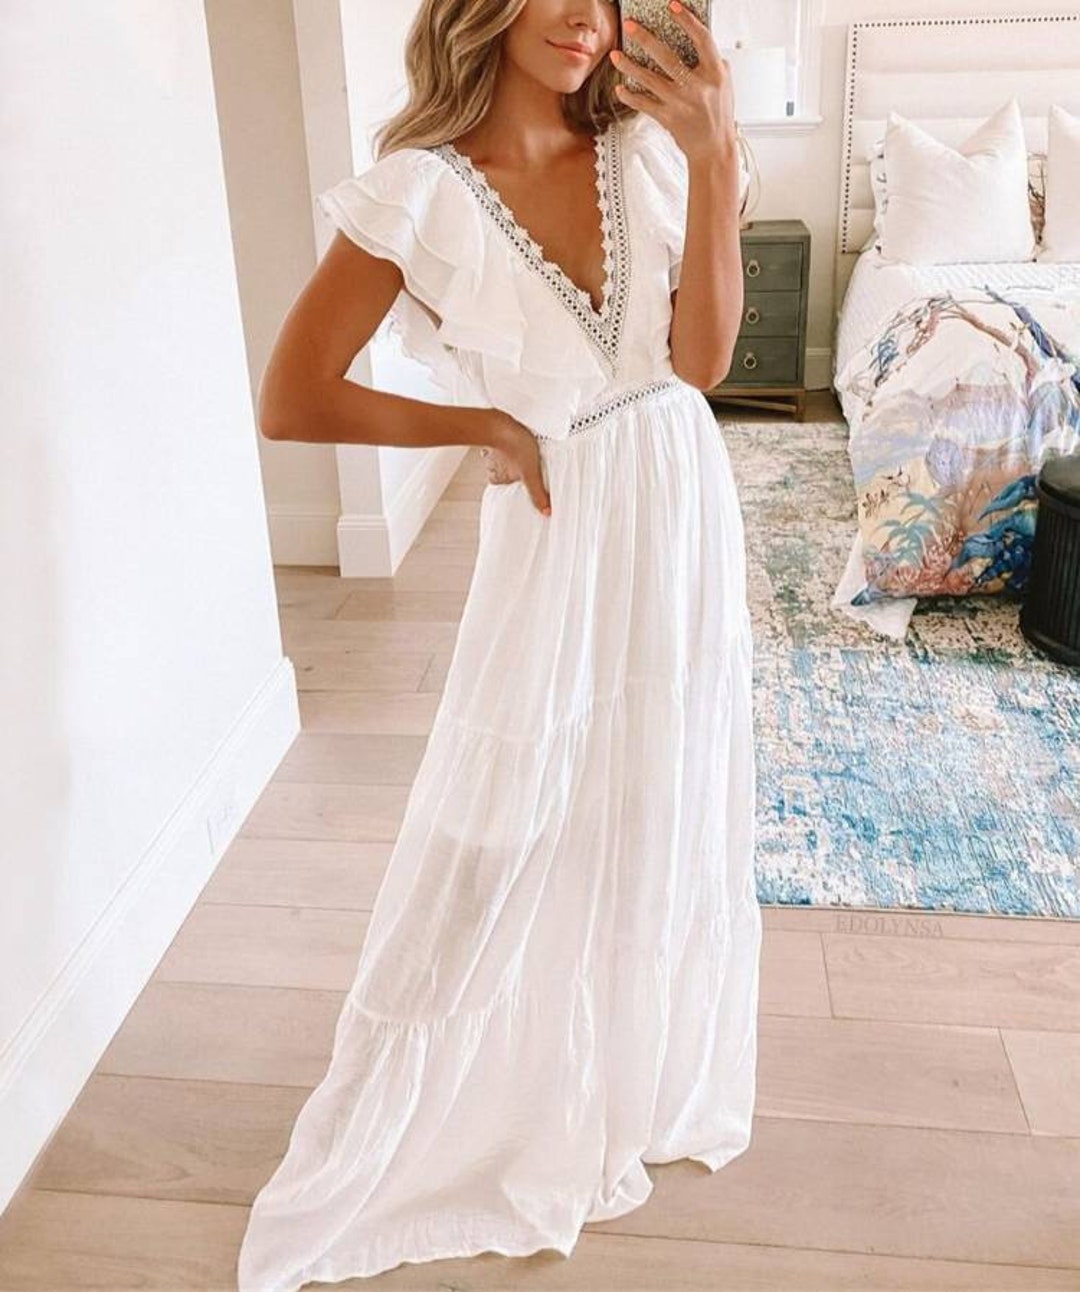 White A-Line Maxi Dress Long Bohemian Style For Summer Ruffled - Etsy